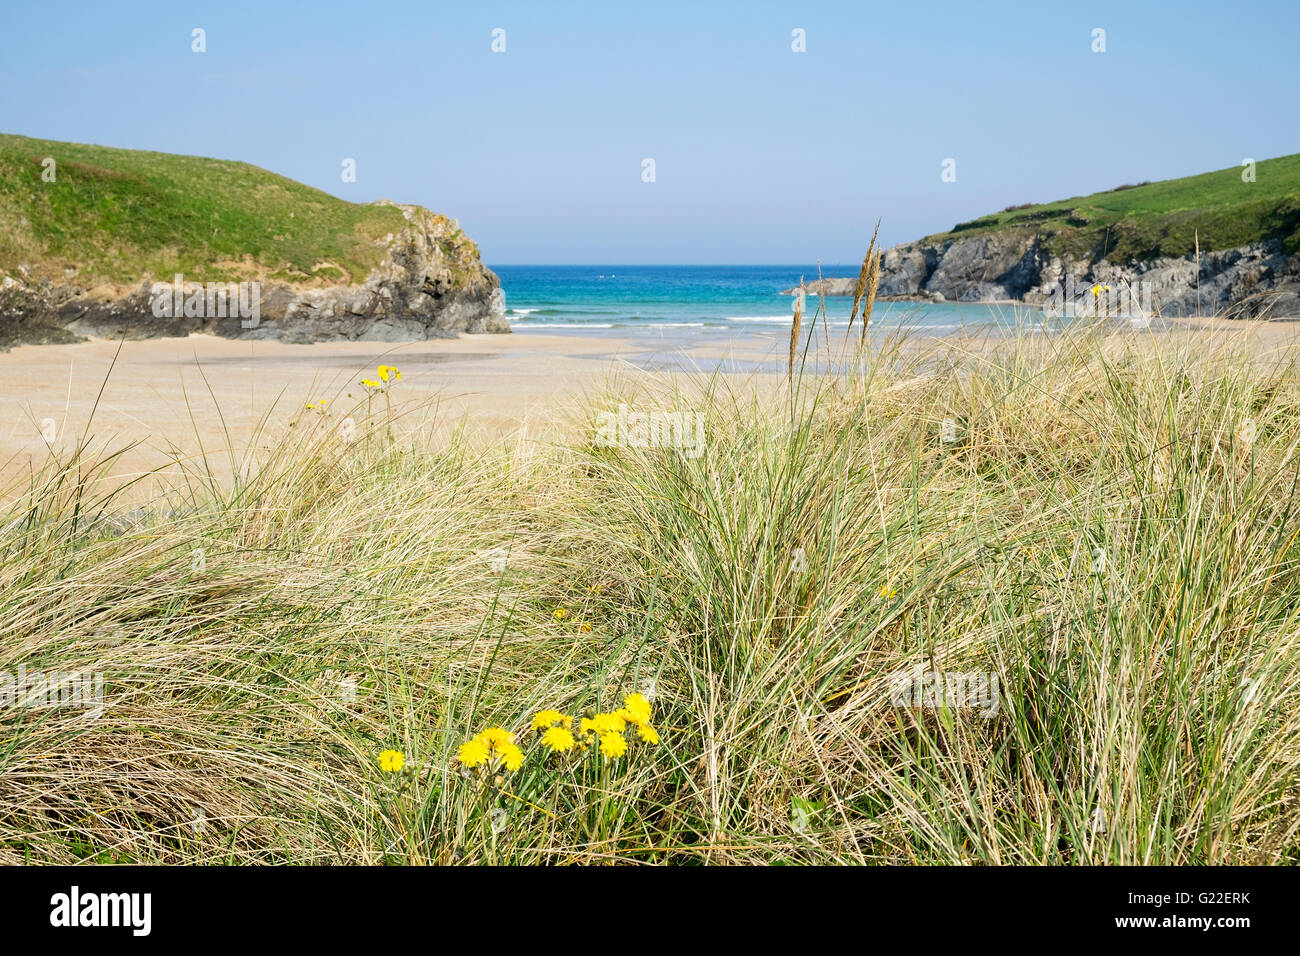 The secluded beach at Porth Joke near Newquay in Cornwall, UK Stock Photo